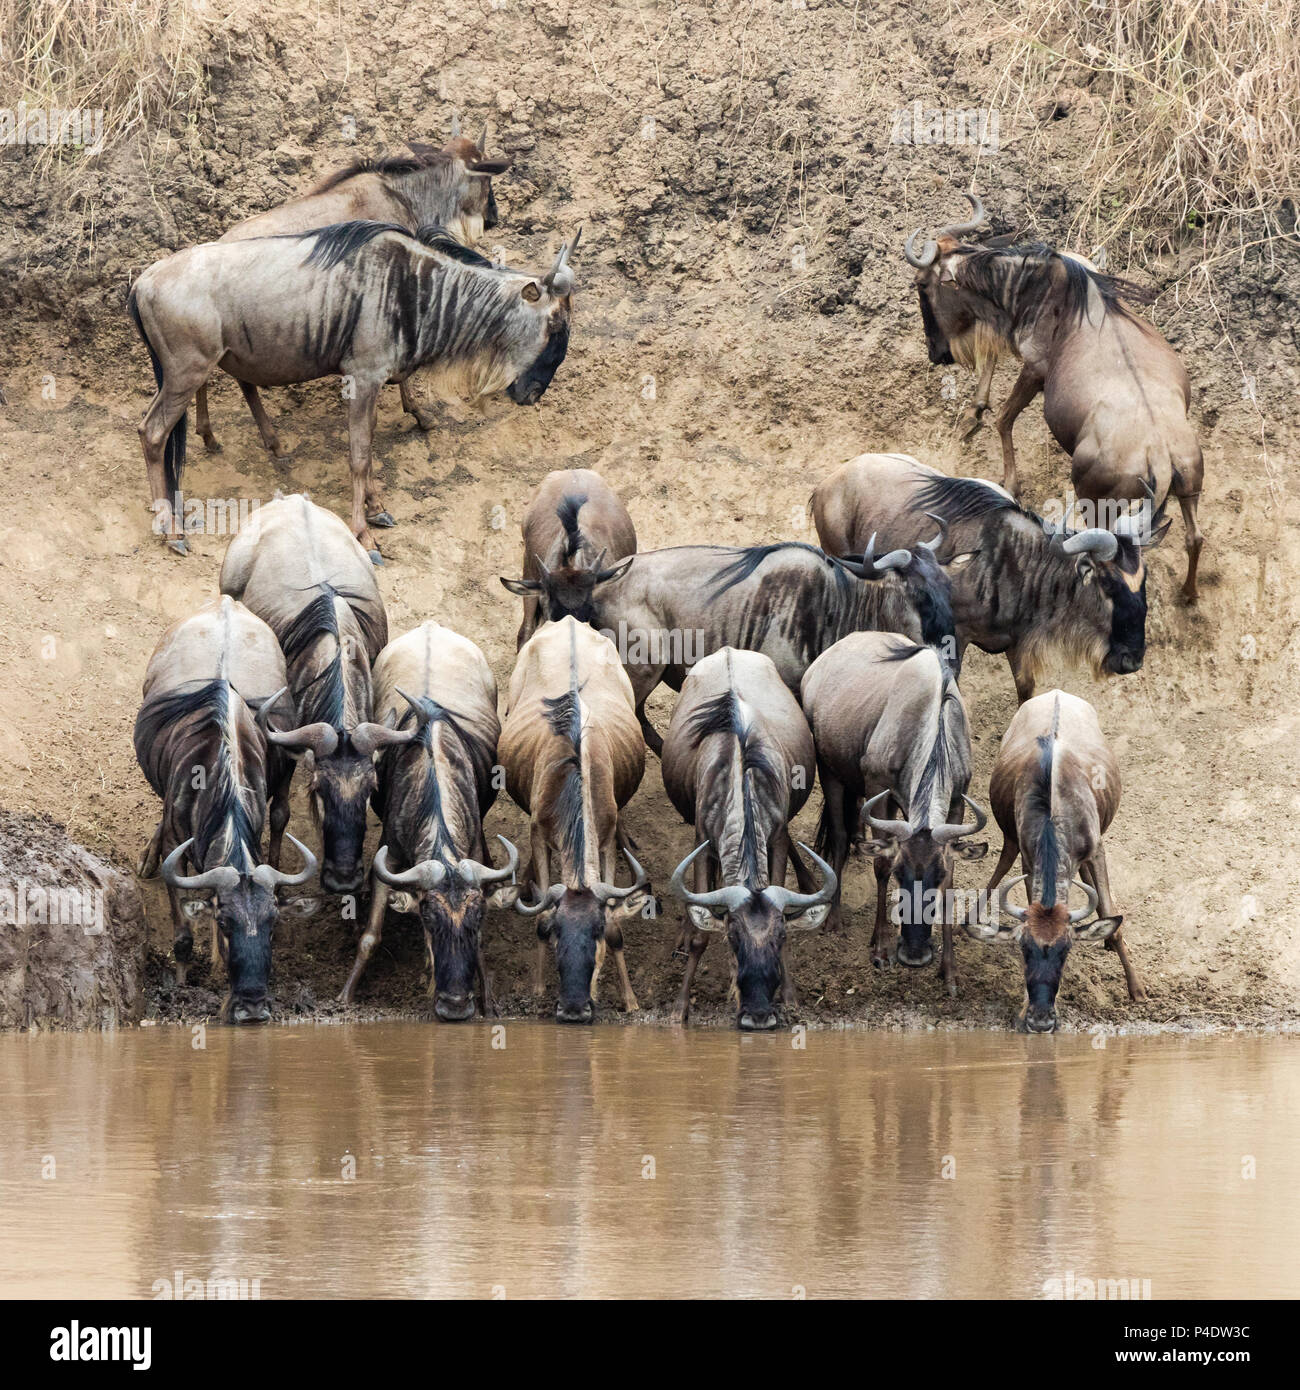 A row of wildebeest drink from the Mara River during the Great Migration in the Masai Mara, Kenya Stock Photo